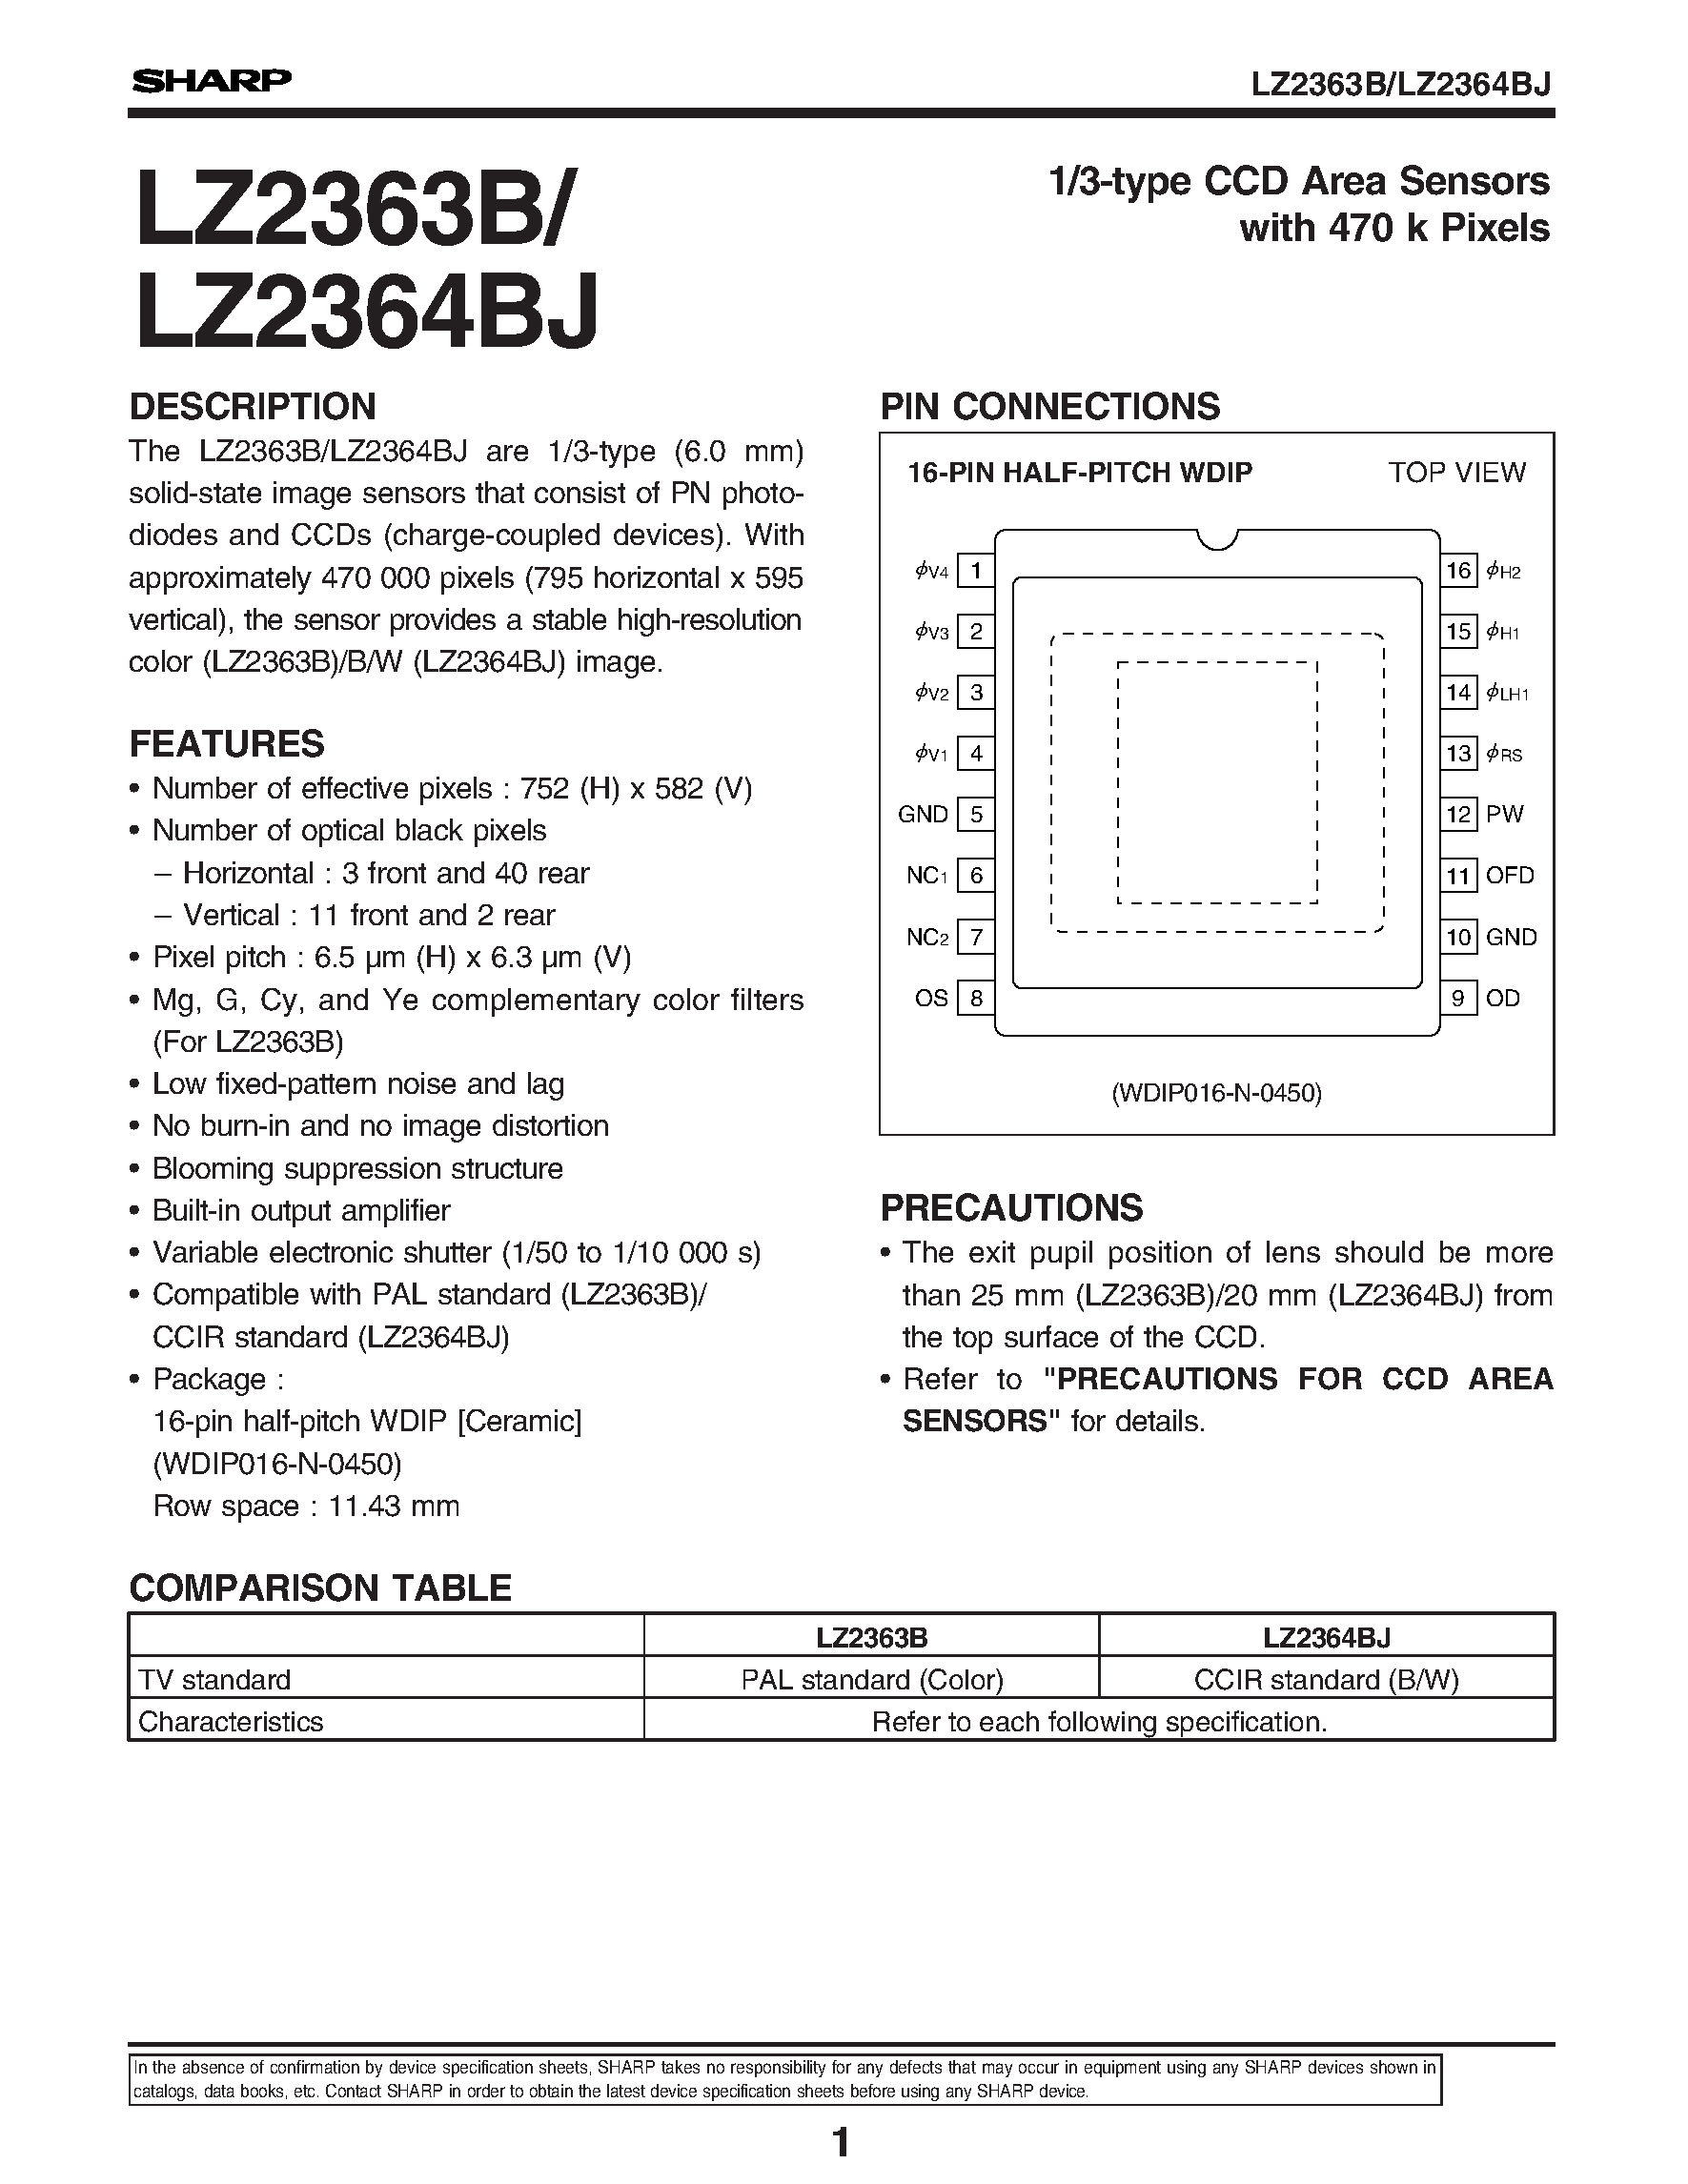 Datasheet LZ2363B - 1/3-type CCD Area Sensors with 470 k Pixels page 1